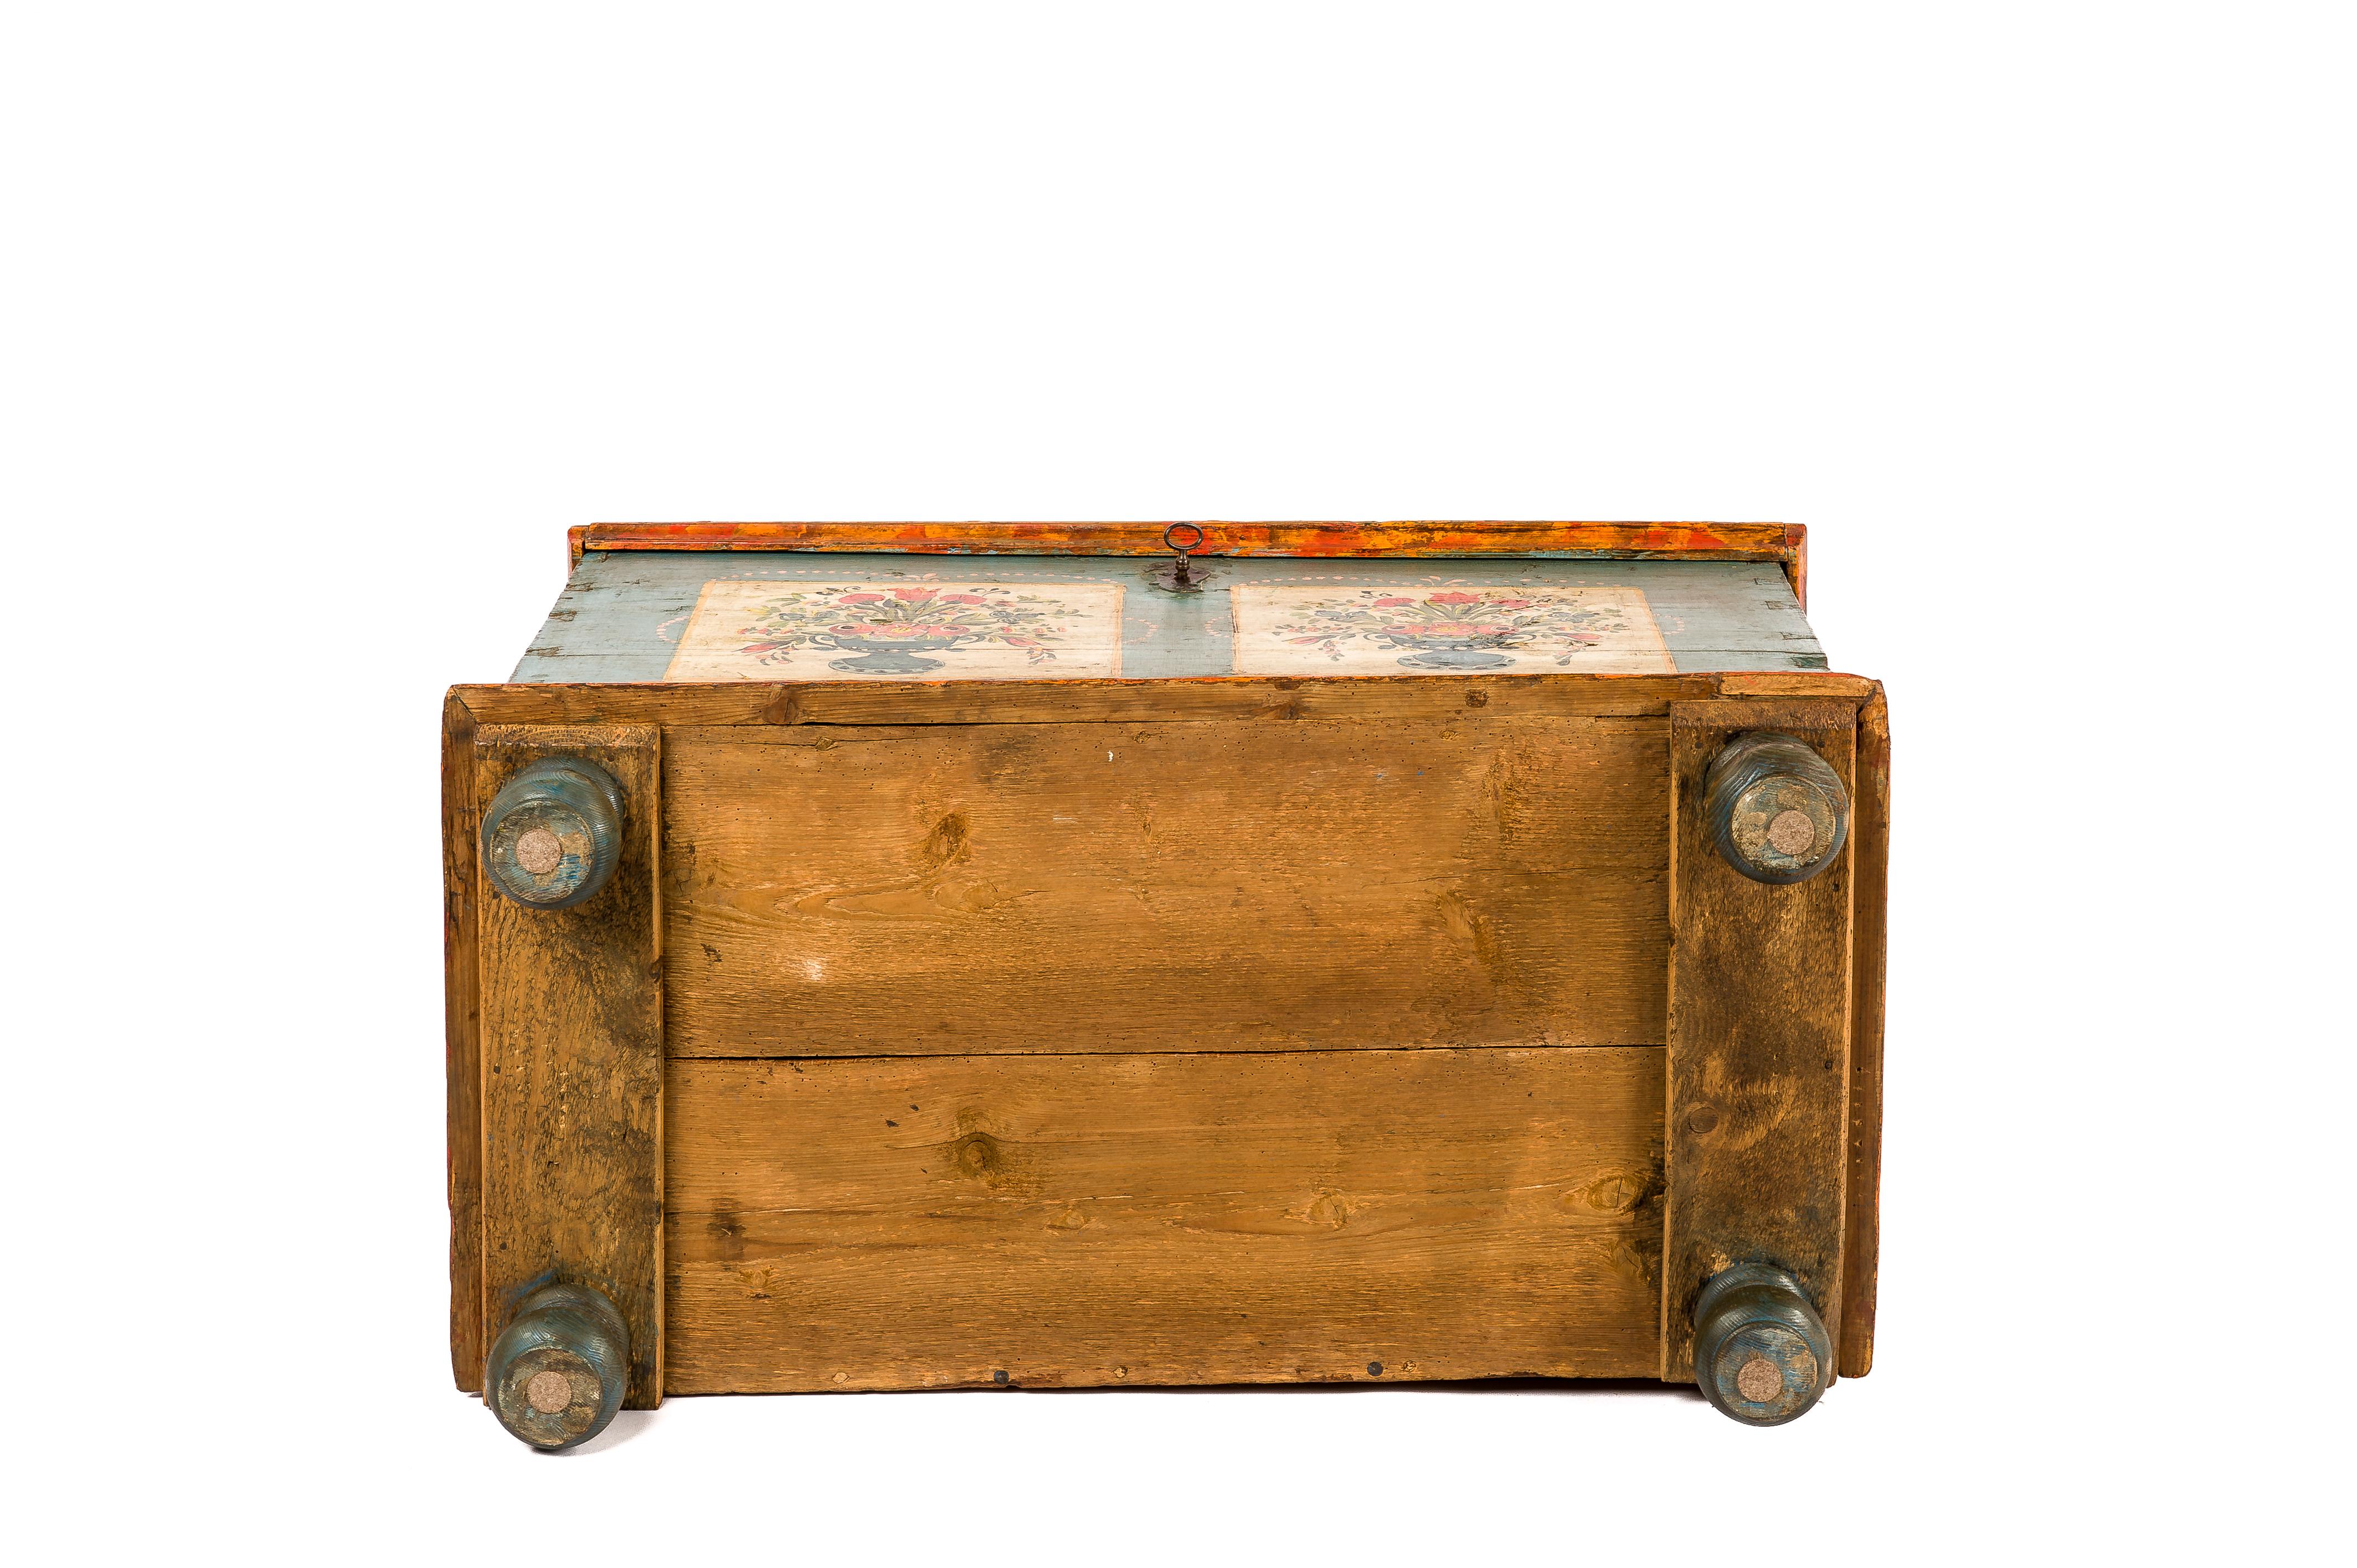 Antique 19th-century solid pine and traditional painted Bohemian trunk or chest 1